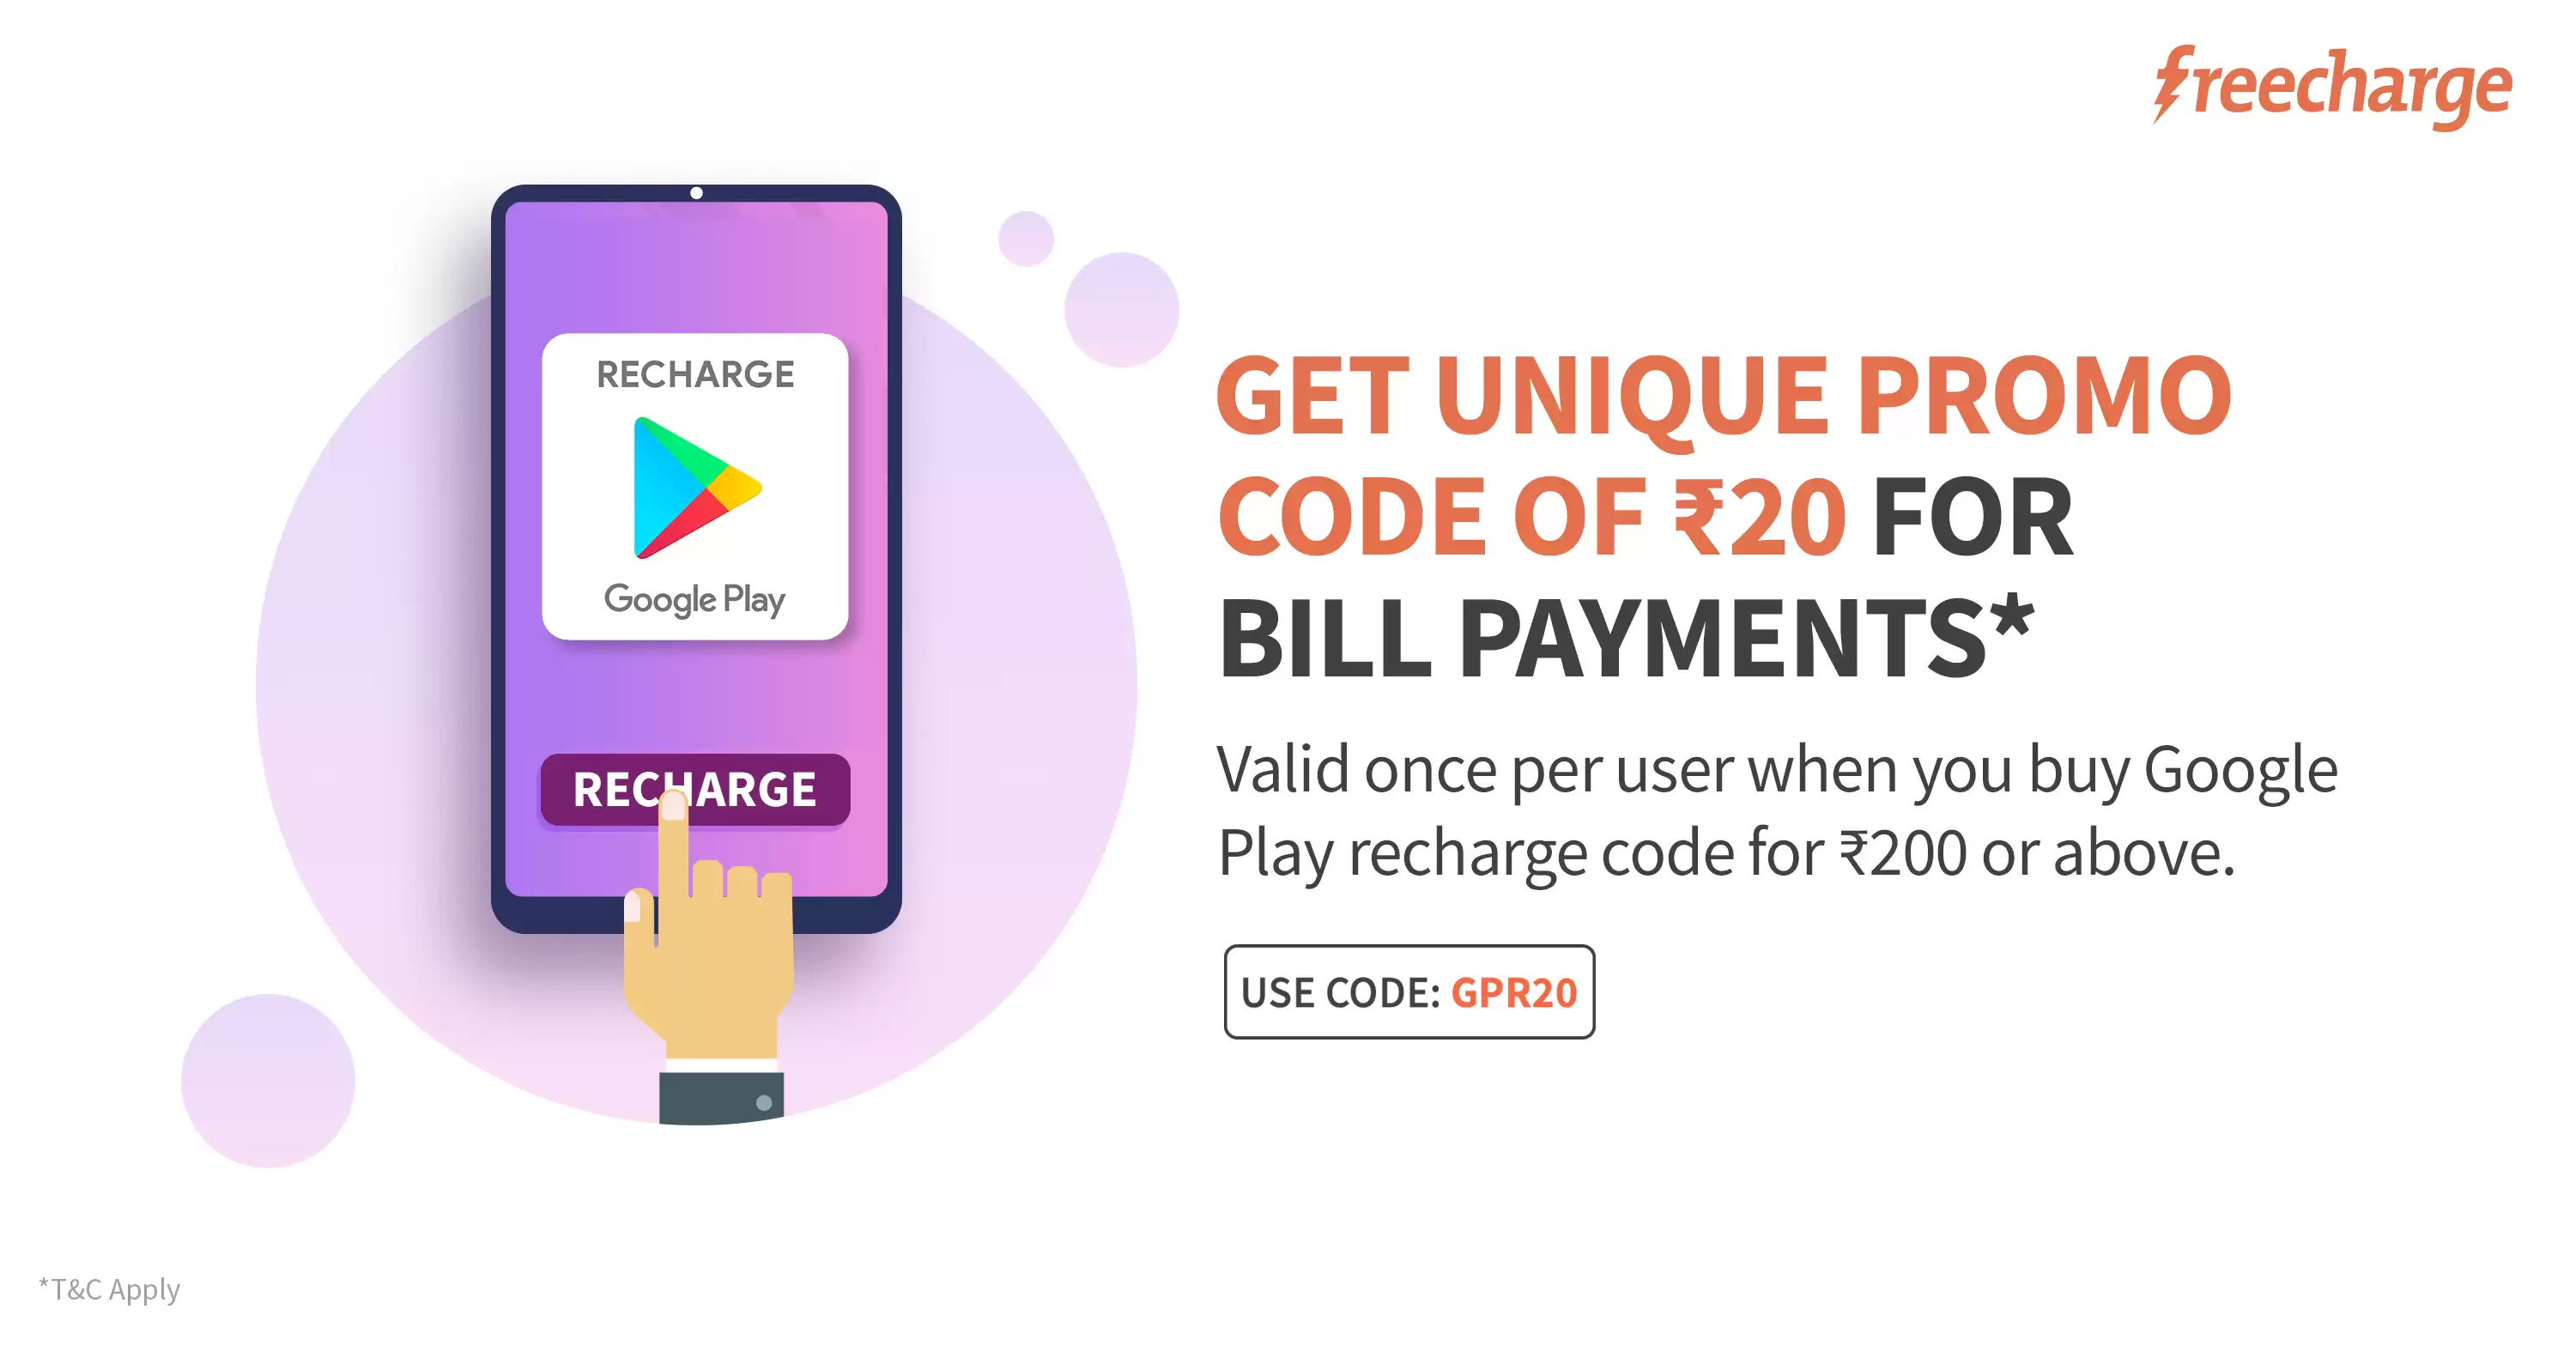 Apply Code Gpr20 To Buy A Google Play Recharge Code And Get A Unique Promo Code Of Rs.20 At Freecharge